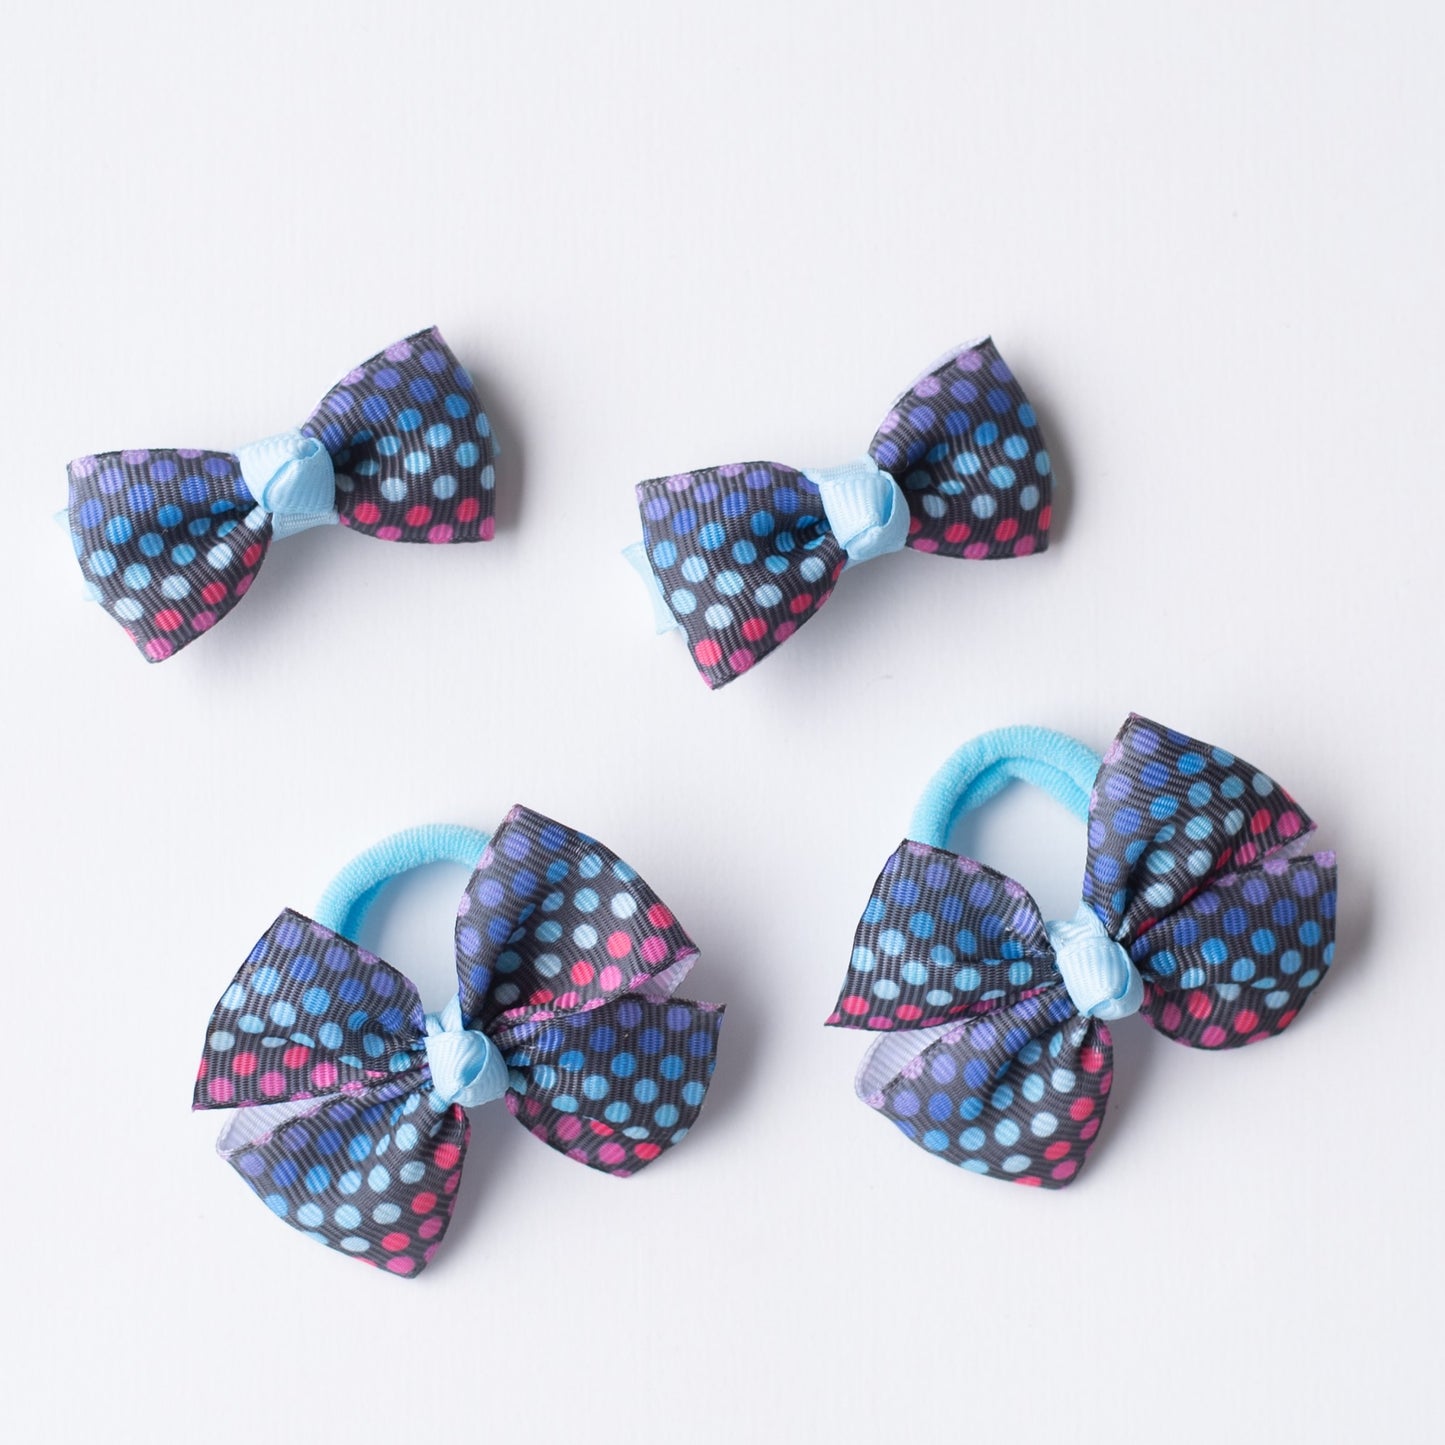 Combo: Polkadot print small bow on alligator cips and matching small rubberbands (4 nos) - Blue and Black.